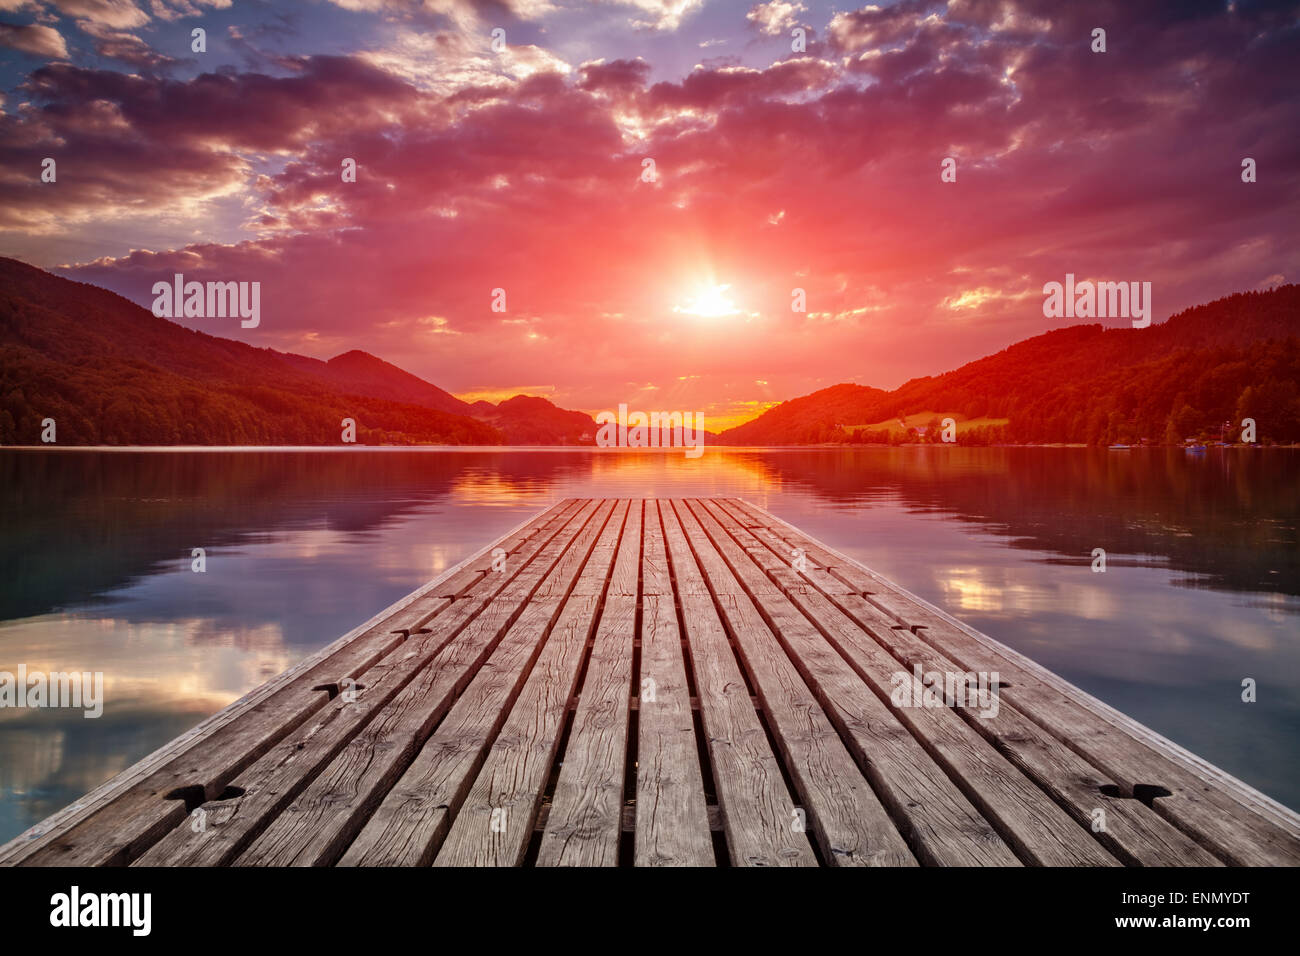 Beautiful sunset view from a wooden platform in Fuschl am see, Austria Stock Photo